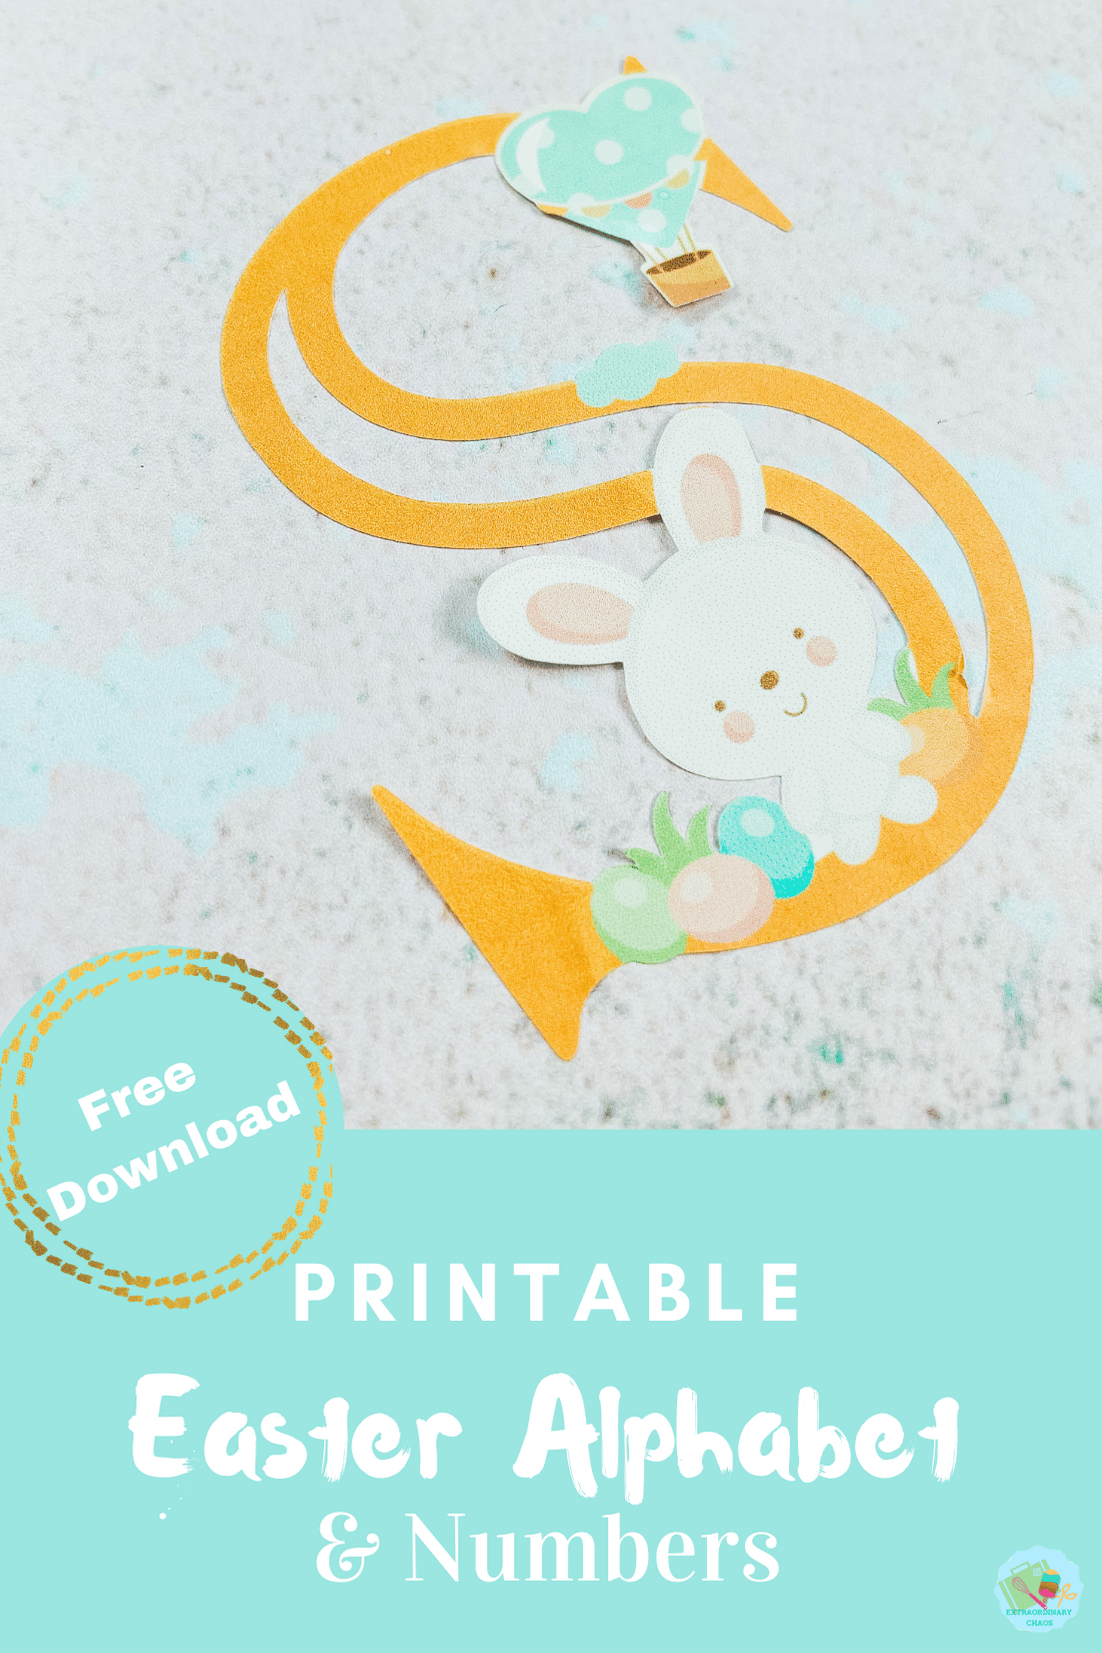 Free downloadable Print and Cut New Easter Alphabet for print and cut out by hand or print and cut with Cricut